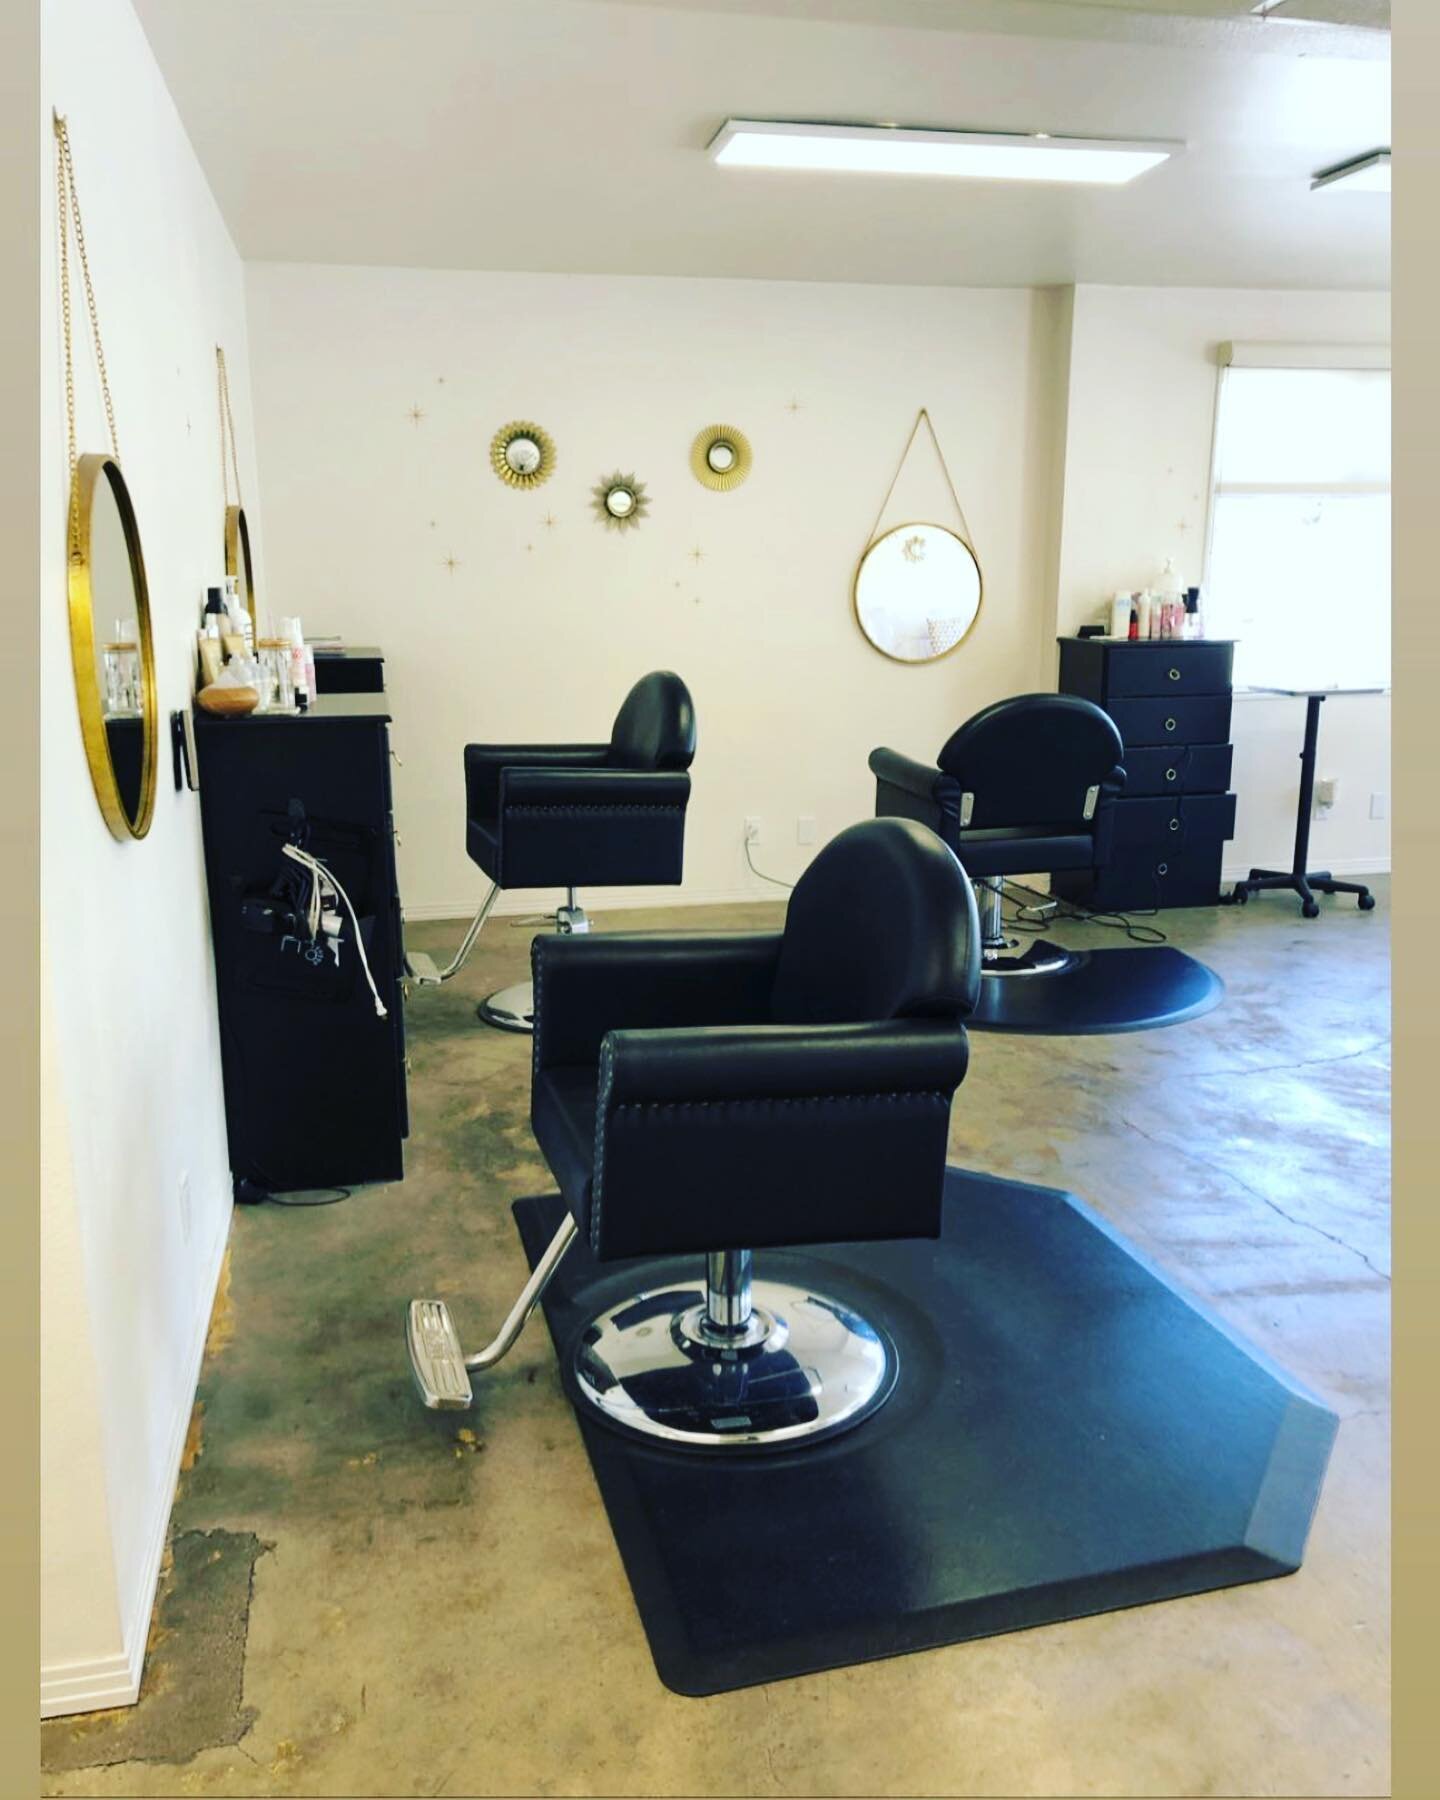 STYLISTS WANTED! 😁 We have chairs for rent. Contact Dana 310.993.7478. ✨ ✨✨